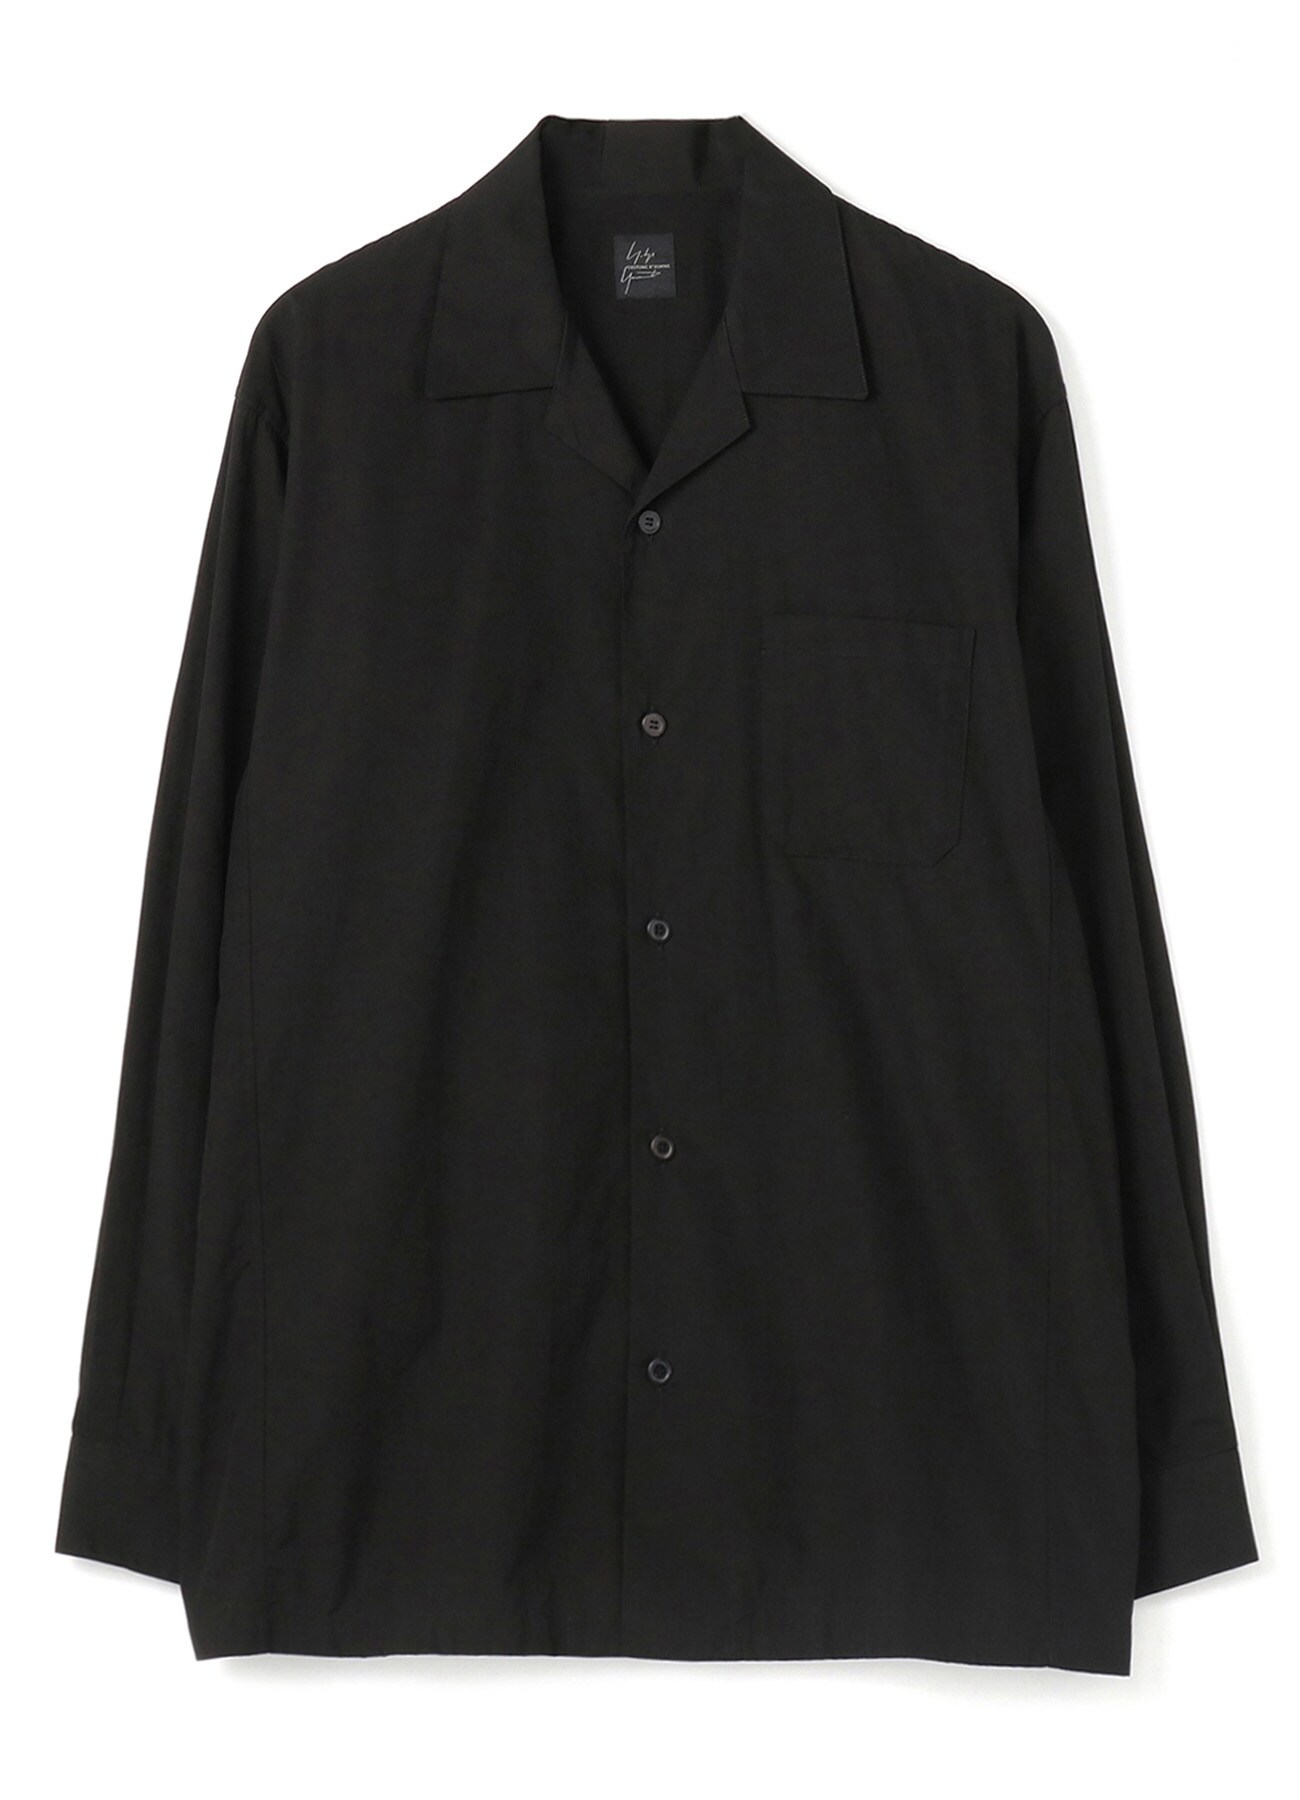 COSTUME D’HOMME 4 DIMENSION MOTION CUTTING OPEN COLLAR SHIRT